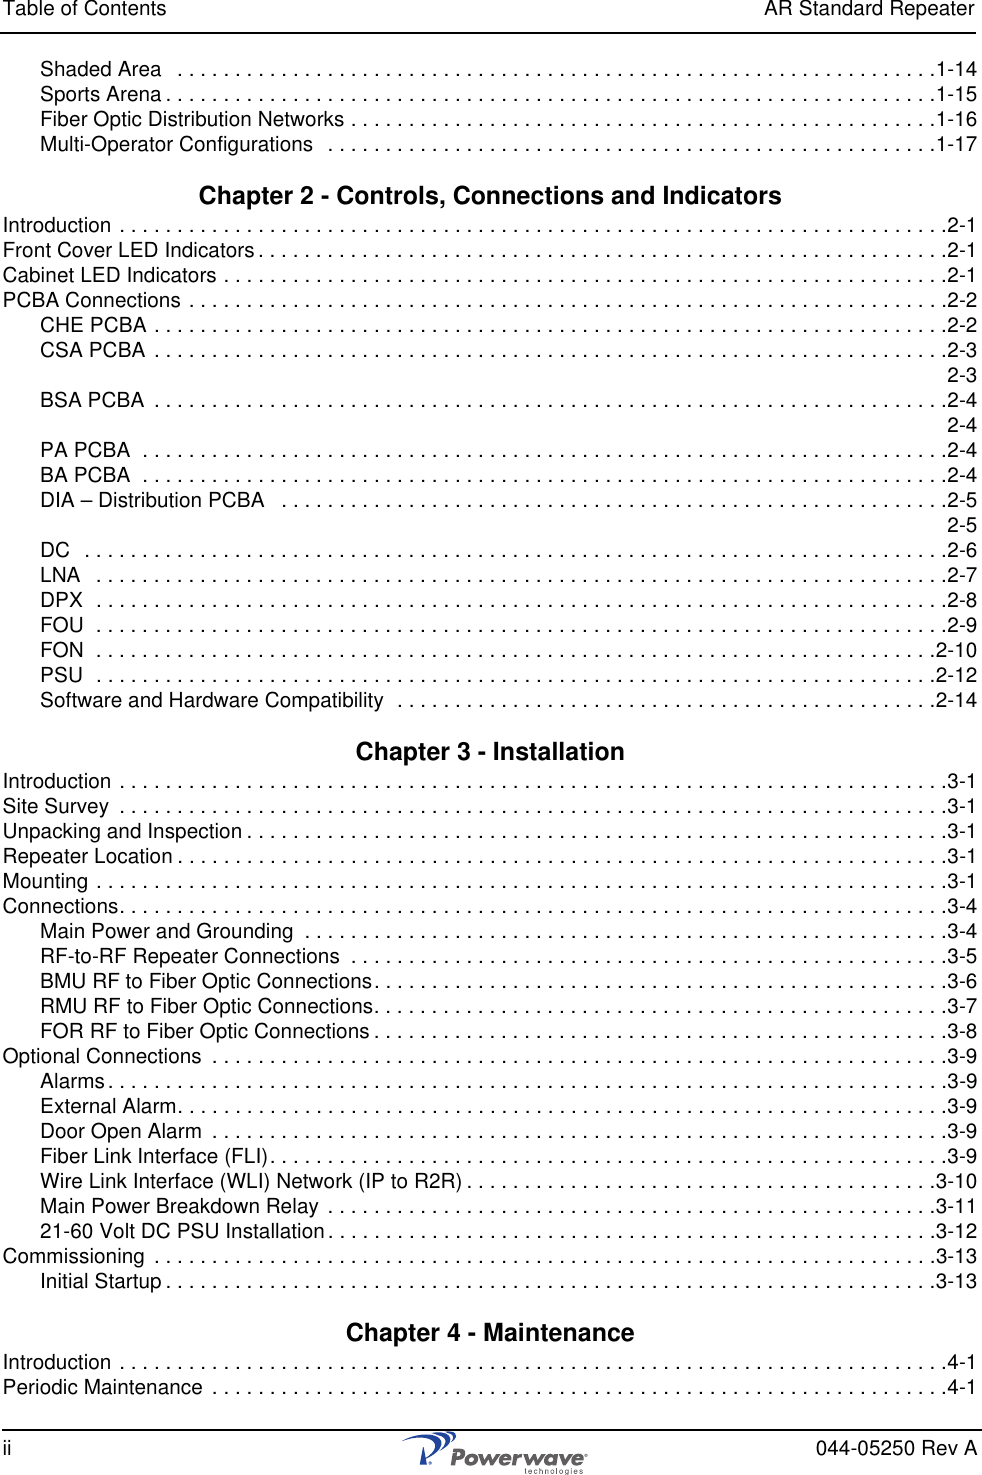 Table of Contents AR Standard Repeaterii 044-05250 Rev AShaded Area   . . . . . . . . . . . . . . . . . . . . . . . . . . . . . . . . . . . . . . . . . . . . . . . . . . . . . . . . . . . . . . . . . .1-14Sports Arena . . . . . . . . . . . . . . . . . . . . . . . . . . . . . . . . . . . . . . . . . . . . . . . . . . . . . . . . . . . . . . . . . . .1-15Fiber Optic Distribution Networks . . . . . . . . . . . . . . . . . . . . . . . . . . . . . . . . . . . . . . . . . . . . . . . . . . .1-16Multi-Operator Configurations  . . . . . . . . . . . . . . . . . . . . . . . . . . . . . . . . . . . . . . . . . . . . . . . . . . . . .1-17Chapter 2 - Controls, Connections and IndicatorsIntroduction . . . . . . . . . . . . . . . . . . . . . . . . . . . . . . . . . . . . . . . . . . . . . . . . . . . . . . . . . . . . . . . . . . . . . . . .2-1Front Cover LED Indicators . . . . . . . . . . . . . . . . . . . . . . . . . . . . . . . . . . . . . . . . . . . . . . . . . . . . . . . . . . . .2-1Cabinet LED Indicators . . . . . . . . . . . . . . . . . . . . . . . . . . . . . . . . . . . . . . . . . . . . . . . . . . . . . . . . . . . . . . .2-1PCBA Connections . . . . . . . . . . . . . . . . . . . . . . . . . . . . . . . . . . . . . . . . . . . . . . . . . . . . . . . . . . . . . . . . . .2-2CHE PCBA . . . . . . . . . . . . . . . . . . . . . . . . . . . . . . . . . . . . . . . . . . . . . . . . . . . . . . . . . . . . . . . . . . . . .2-2CSA PCBA . . . . . . . . . . . . . . . . . . . . . . . . . . . . . . . . . . . . . . . . . . . . . . . . . . . . . . . . . . . . . . . . . . . . .2-3 2-3BSA PCBA  . . . . . . . . . . . . . . . . . . . . . . . . . . . . . . . . . . . . . . . . . . . . . . . . . . . . . . . . . . . . . . . . . . . . .2-4 2-4PA PCBA  . . . . . . . . . . . . . . . . . . . . . . . . . . . . . . . . . . . . . . . . . . . . . . . . . . . . . . . . . . . . . . . . . . . . . .2-4BA PCBA  . . . . . . . . . . . . . . . . . . . . . . . . . . . . . . . . . . . . . . . . . . . . . . . . . . . . . . . . . . . . . . . . . . . . . .2-4DIA – Distribution PCBA   . . . . . . . . . . . . . . . . . . . . . . . . . . . . . . . . . . . . . . . . . . . . . . . . . . . . . . . . . .2-5 2-5DC  . . . . . . . . . . . . . . . . . . . . . . . . . . . . . . . . . . . . . . . . . . . . . . . . . . . . . . . . . . . . . . . . . . . . . . . . . . .2-6LNA   . . . . . . . . . . . . . . . . . . . . . . . . . . . . . . . . . . . . . . . . . . . . . . . . . . . . . . . . . . . . . . . . . . . . . . . . . .2-7DPX  . . . . . . . . . . . . . . . . . . . . . . . . . . . . . . . . . . . . . . . . . . . . . . . . . . . . . . . . . . . . . . . . . . . . . . . . . .2-8FOU  . . . . . . . . . . . . . . . . . . . . . . . . . . . . . . . . . . . . . . . . . . . . . . . . . . . . . . . . . . . . . . . . . . . . . . . . . .2-9FON  . . . . . . . . . . . . . . . . . . . . . . . . . . . . . . . . . . . . . . . . . . . . . . . . . . . . . . . . . . . . . . . . . . . . . . . . .2-10PSU  . . . . . . . . . . . . . . . . . . . . . . . . . . . . . . . . . . . . . . . . . . . . . . . . . . . . . . . . . . . . . . . . . . . . . . . . .2-12Software and Hardware Compatibility  . . . . . . . . . . . . . . . . . . . . . . . . . . . . . . . . . . . . . . . . . . . . . . .2-14Chapter 3 - InstallationIntroduction . . . . . . . . . . . . . . . . . . . . . . . . . . . . . . . . . . . . . . . . . . . . . . . . . . . . . . . . . . . . . . . . . . . . . . . .3-1Site Survey  . . . . . . . . . . . . . . . . . . . . . . . . . . . . . . . . . . . . . . . . . . . . . . . . . . . . . . . . . . . . . . . . . . . . . . . .3-1Unpacking and Inspection . . . . . . . . . . . . . . . . . . . . . . . . . . . . . . . . . . . . . . . . . . . . . . . . . . . . . . . . . . . . .3-1Repeater Location . . . . . . . . . . . . . . . . . . . . . . . . . . . . . . . . . . . . . . . . . . . . . . . . . . . . . . . . . . . . . . . . . . .3-1Mounting . . . . . . . . . . . . . . . . . . . . . . . . . . . . . . . . . . . . . . . . . . . . . . . . . . . . . . . . . . . . . . . . . . . . . . . . . .3-1Connections. . . . . . . . . . . . . . . . . . . . . . . . . . . . . . . . . . . . . . . . . . . . . . . . . . . . . . . . . . . . . . . . . . . . . . . .3-4Main Power and Grounding  . . . . . . . . . . . . . . . . . . . . . . . . . . . . . . . . . . . . . . . . . . . . . . . . . . . . . . . .3-4RF-to-RF Repeater Connections  . . . . . . . . . . . . . . . . . . . . . . . . . . . . . . . . . . . . . . . . . . . . . . . . . . . .3-5BMU RF to Fiber Optic Connections. . . . . . . . . . . . . . . . . . . . . . . . . . . . . . . . . . . . . . . . . . . . . . . . . .3-6RMU RF to Fiber Optic Connections. . . . . . . . . . . . . . . . . . . . . . . . . . . . . . . . . . . . . . . . . . . . . . . . . .3-7FOR RF to Fiber Optic Connections . . . . . . . . . . . . . . . . . . . . . . . . . . . . . . . . . . . . . . . . . . . . . . . . . .3-8Optional Connections  . . . . . . . . . . . . . . . . . . . . . . . . . . . . . . . . . . . . . . . . . . . . . . . . . . . . . . . . . . . . . . . .3-9Alarms. . . . . . . . . . . . . . . . . . . . . . . . . . . . . . . . . . . . . . . . . . . . . . . . . . . . . . . . . . . . . . . . . . . . . . . . .3-9External Alarm. . . . . . . . . . . . . . . . . . . . . . . . . . . . . . . . . . . . . . . . . . . . . . . . . . . . . . . . . . . . . . . . . . .3-9Door Open Alarm  . . . . . . . . . . . . . . . . . . . . . . . . . . . . . . . . . . . . . . . . . . . . . . . . . . . . . . . . . . . . . . . .3-9Fiber Link Interface (FLI). . . . . . . . . . . . . . . . . . . . . . . . . . . . . . . . . . . . . . . . . . . . . . . . . . . . . . . . . . .3-9Wire Link Interface (WLI) Network (IP to R2R) . . . . . . . . . . . . . . . . . . . . . . . . . . . . . . . . . . . . . . . . .3-10Main Power Breakdown Relay . . . . . . . . . . . . . . . . . . . . . . . . . . . . . . . . . . . . . . . . . . . . . . . . . . . . .3-1121-60 Volt DC PSU Installation . . . . . . . . . . . . . . . . . . . . . . . . . . . . . . . . . . . . . . . . . . . . . . . . . . . . .3-12Commissioning  . . . . . . . . . . . . . . . . . . . . . . . . . . . . . . . . . . . . . . . . . . . . . . . . . . . . . . . . . . . . . . . . . . . .3-13Initial Startup . . . . . . . . . . . . . . . . . . . . . . . . . . . . . . . . . . . . . . . . . . . . . . . . . . . . . . . . . . . . . . . . . . .3-13Chapter 4 - MaintenanceIntroduction . . . . . . . . . . . . . . . . . . . . . . . . . . . . . . . . . . . . . . . . . . . . . . . . . . . . . . . . . . . . . . . . . . . . . . . .4-1Periodic Maintenance  . . . . . . . . . . . . . . . . . . . . . . . . . . . . . . . . . . . . . . . . . . . . . . . . . . . . . . . . . . . . . . . .4-1